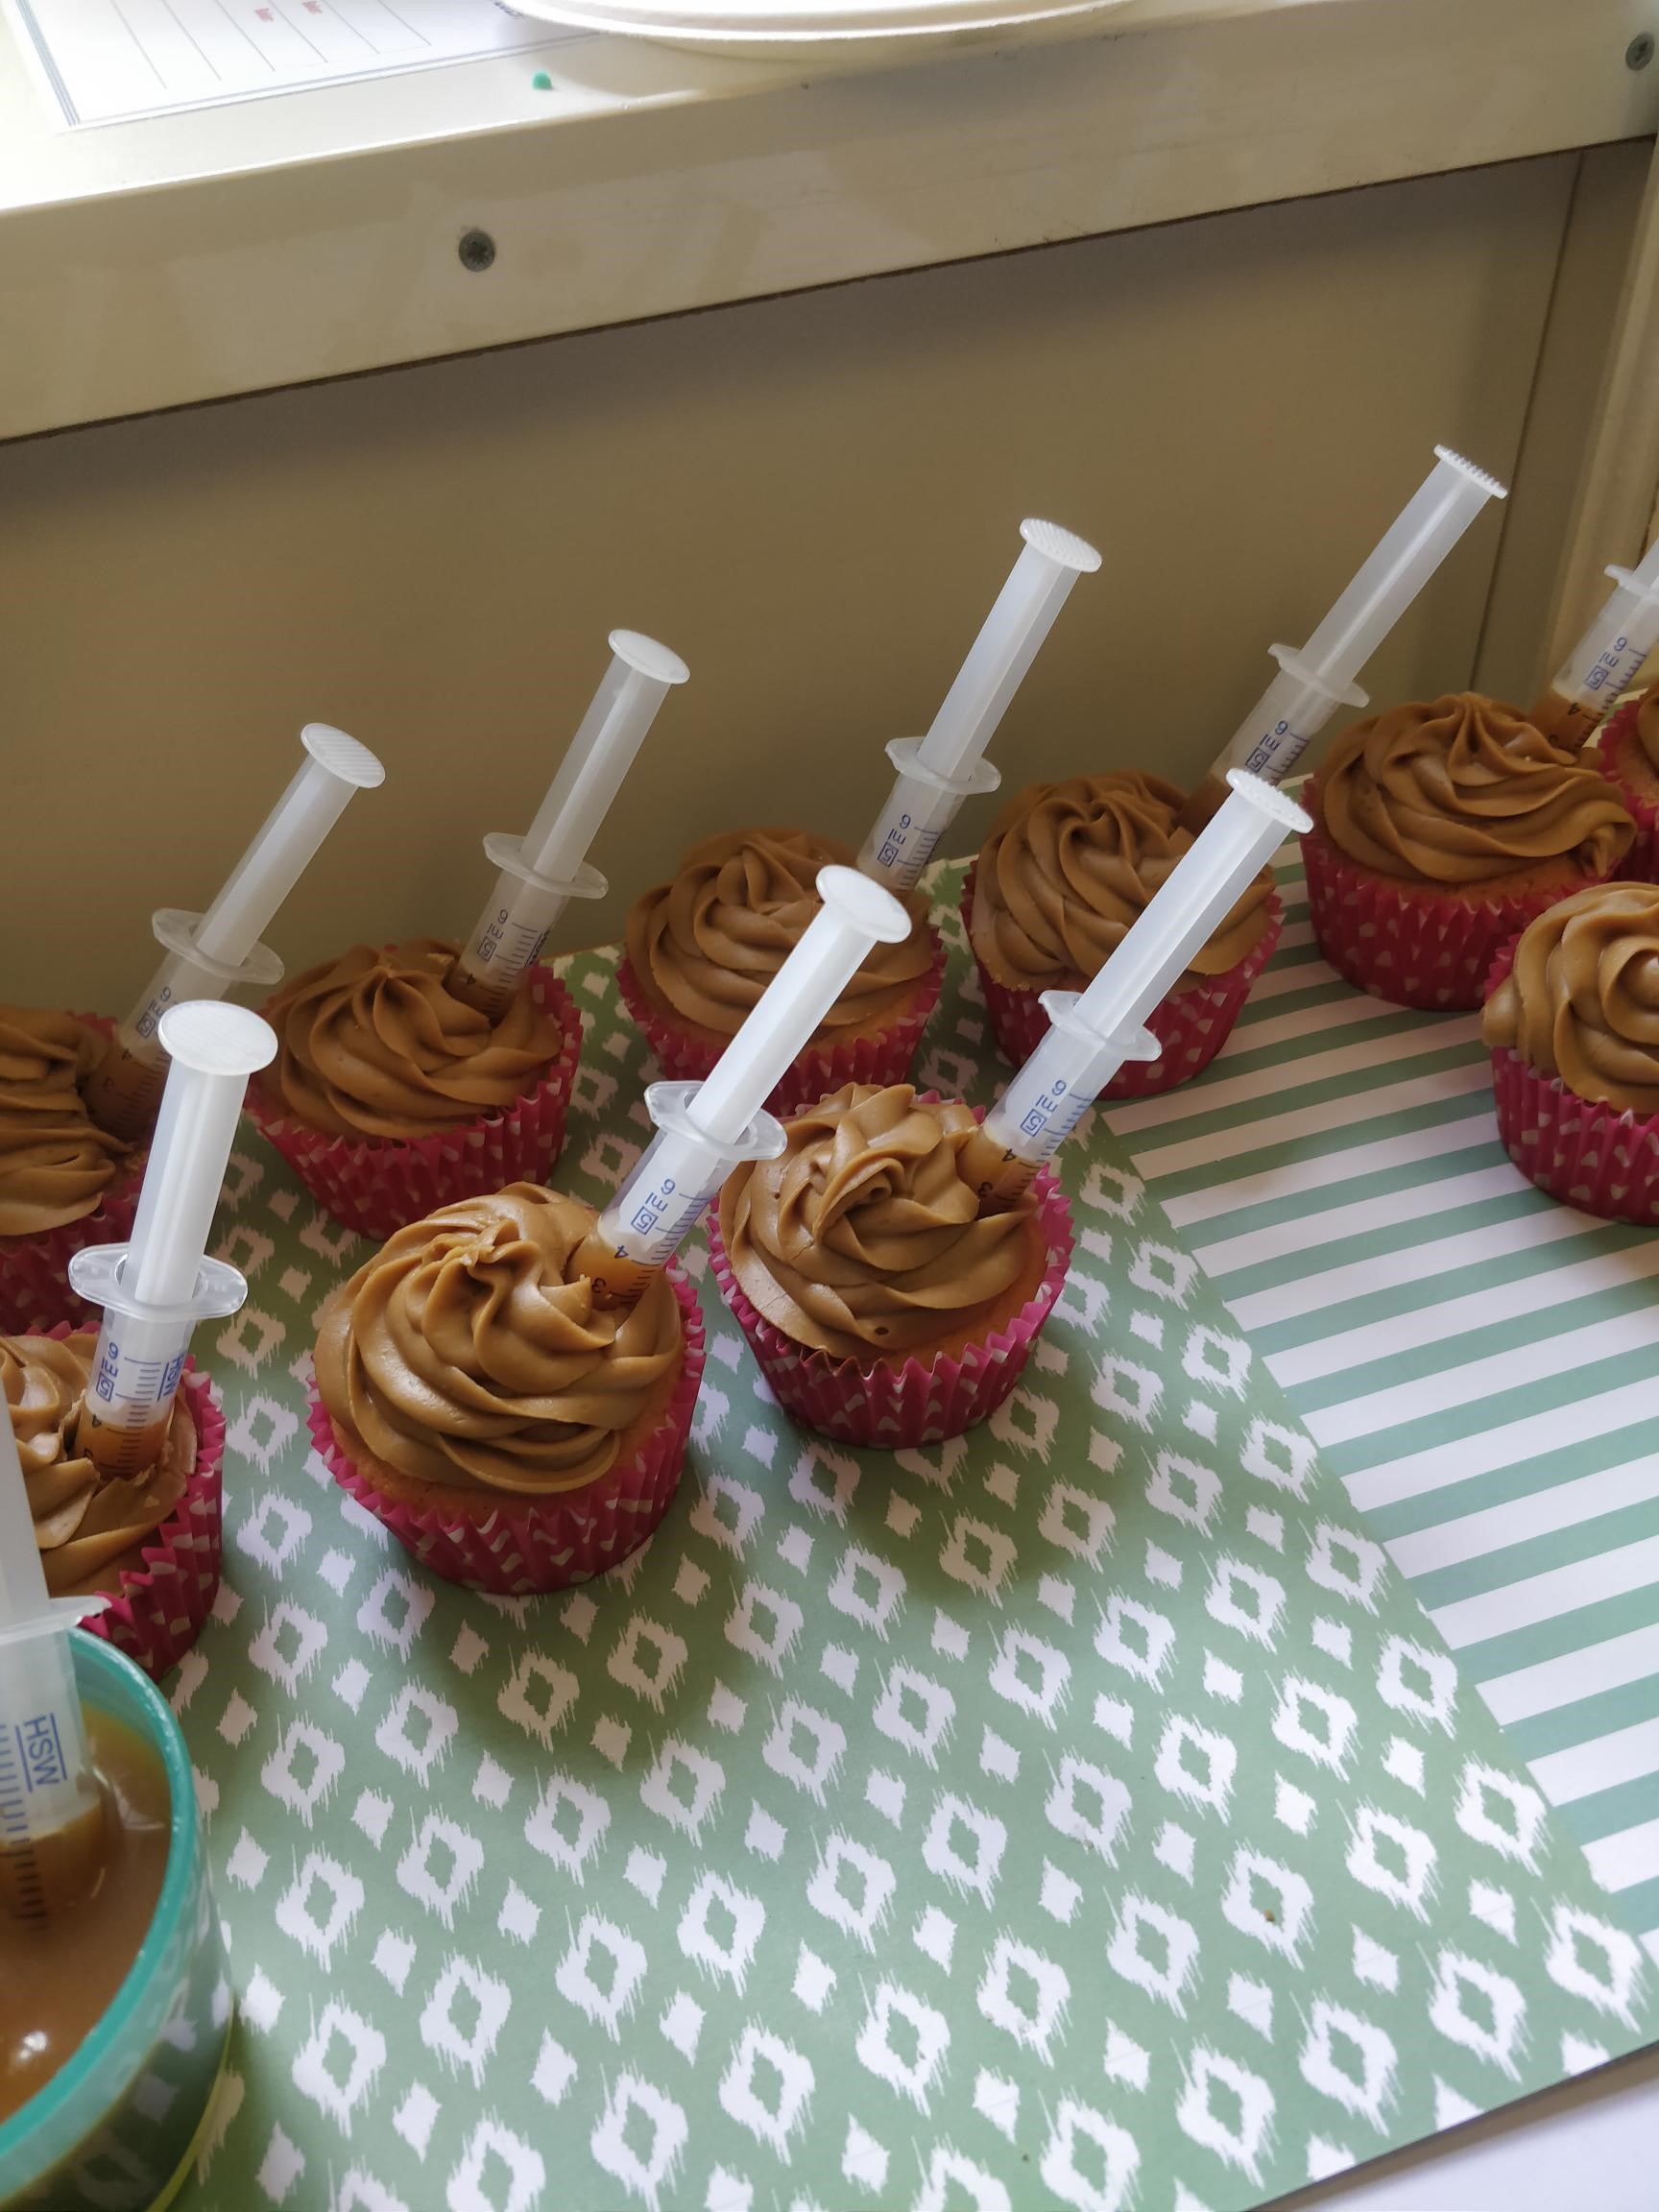 Apple and toffee cupcakes with syringes of toffee sauce